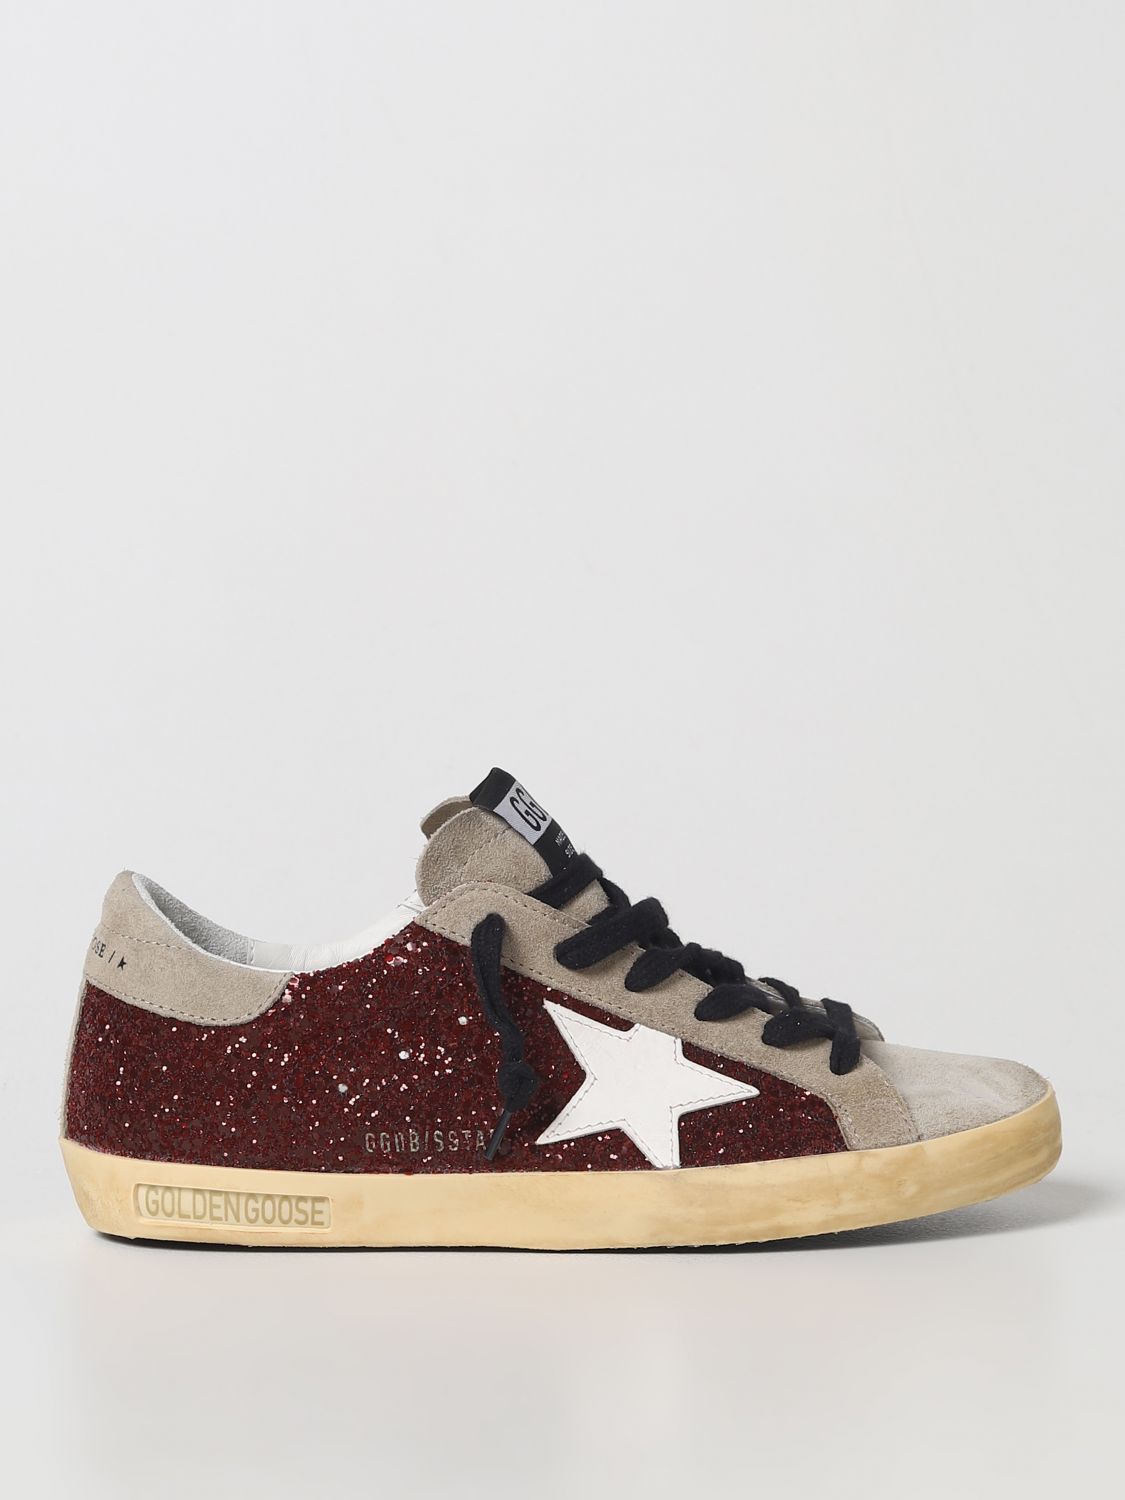 Caso Arqueólogo gato GOLDEN GOOSE: Super-Star Classic sneakers in suede and glitter - Burgundy |  Golden Goose sneakers GWF00101F00318581770 online on GIGLIO.COM